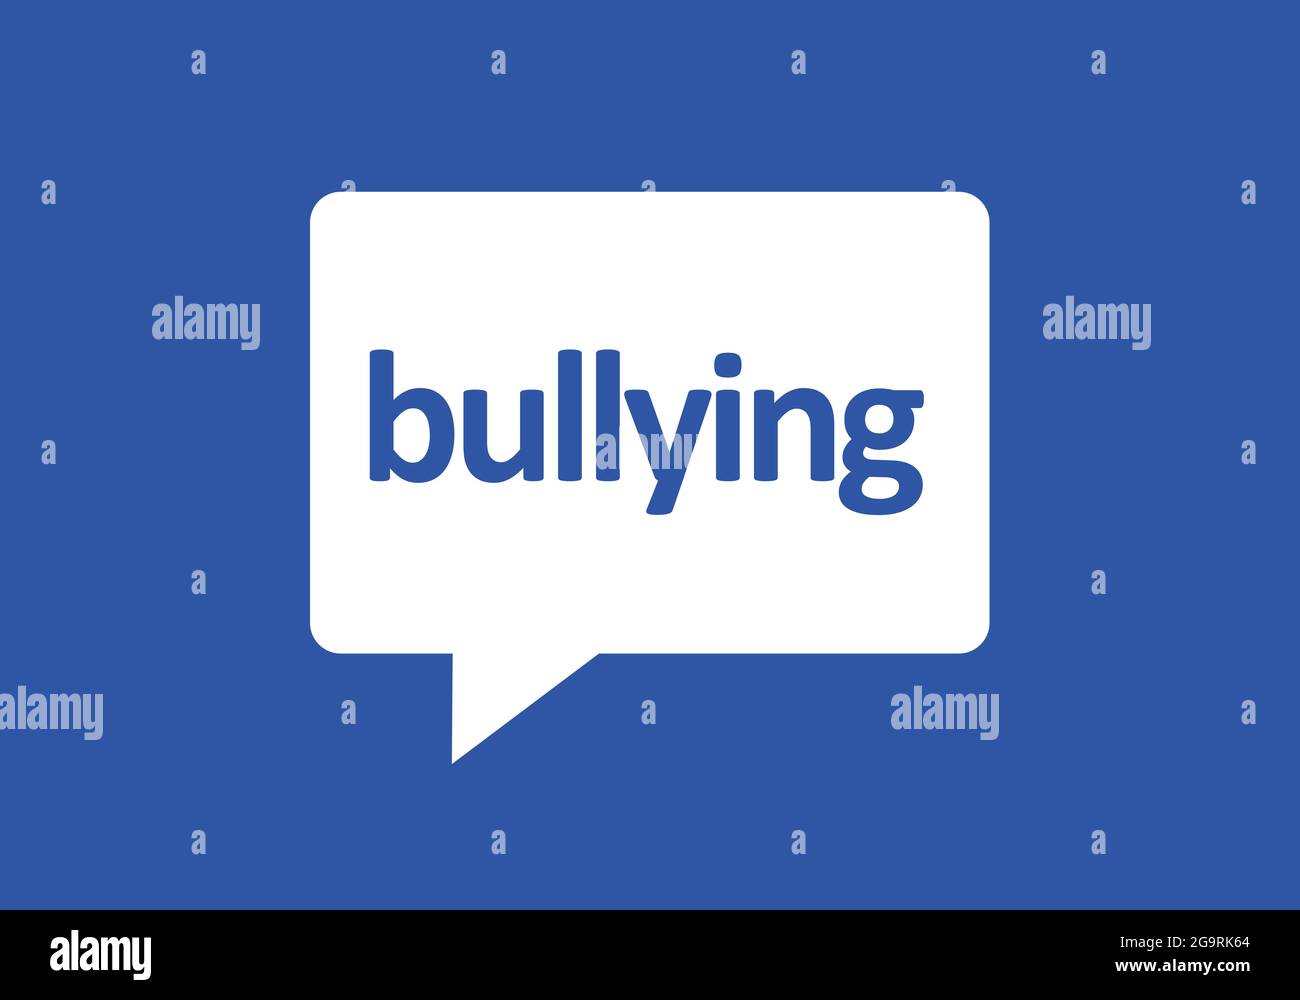 Cyberbully and cyberbullying - social media chat and message bubble with offensive content - attack and assault through social networking site. Vector Stock Photo